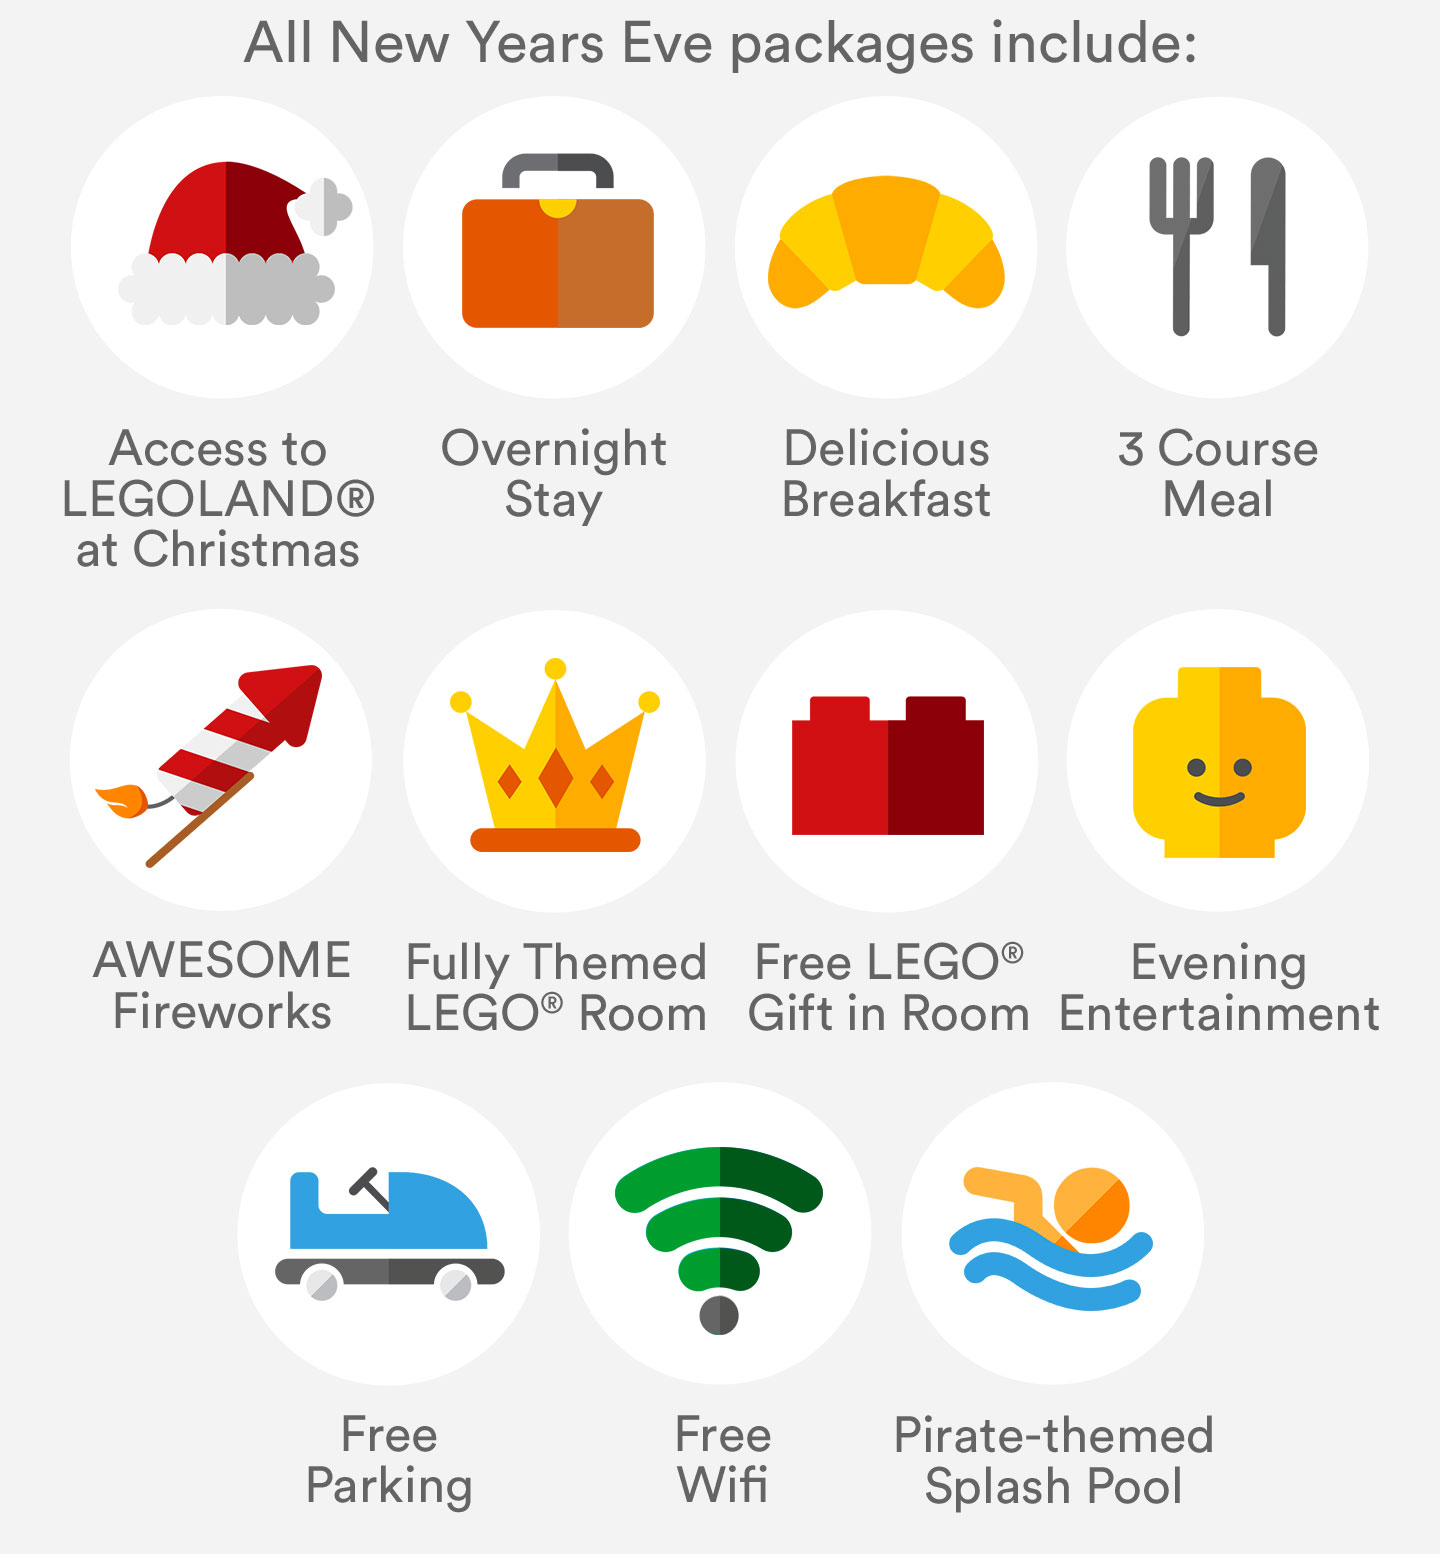 LEGOLAND Holidays packages include: 1-day theme park entry, one night stay, breakfast, 3-course meal, awesome fireworks, free LEGO gift, evening entertainment, pirate themed splash pool, free parking, free WiFi